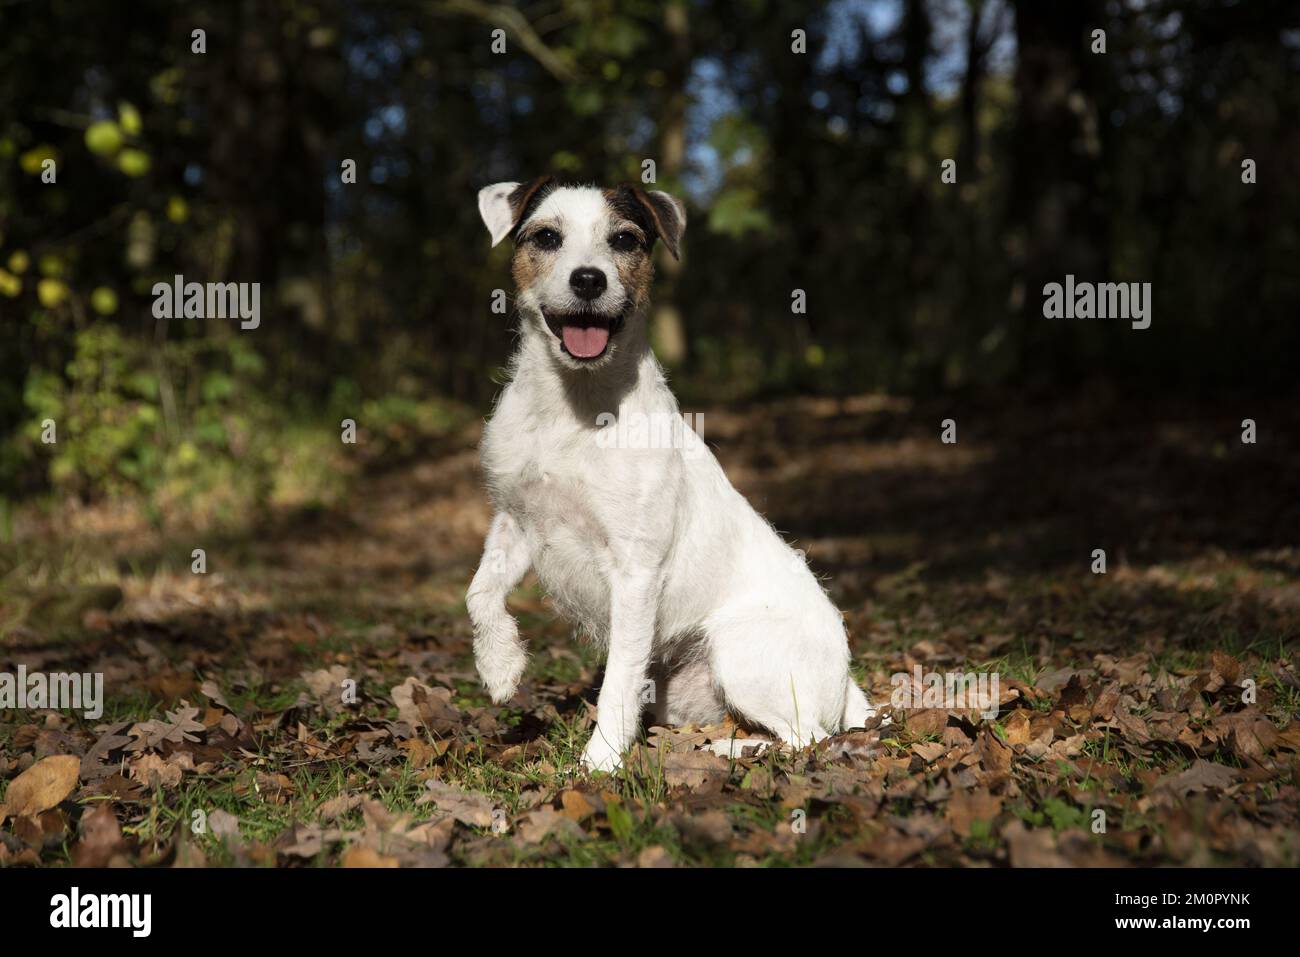 DOG, Parson Jack Russell in autumn leaves Stock Photo